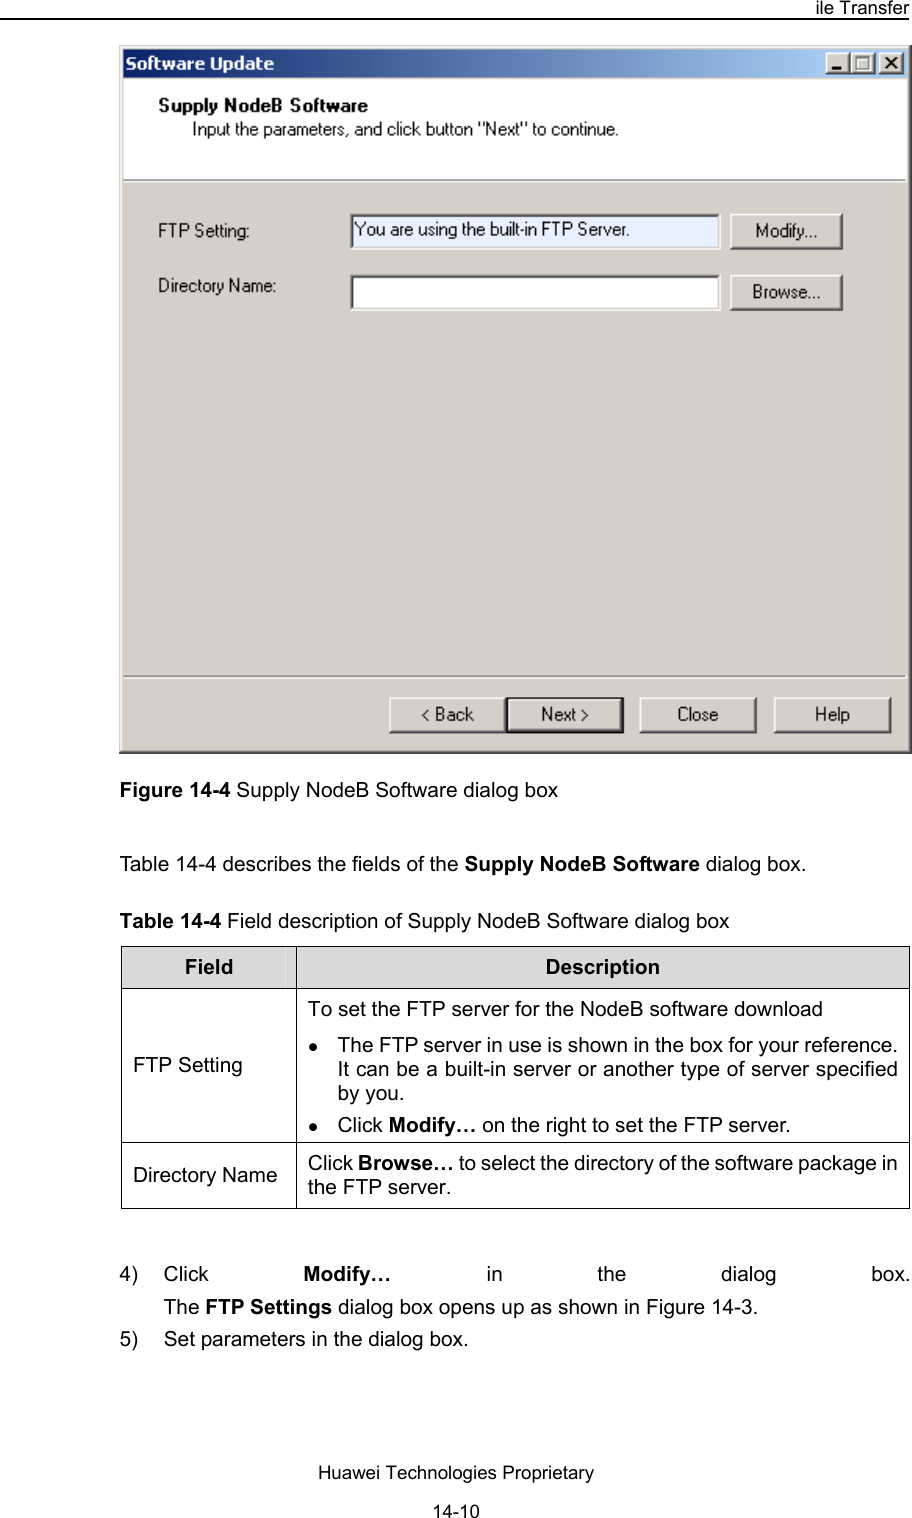 NodeB LMT User Guide Chapter 14  NodeB Software Update and Data Configuration File Transfer Huawei Technologies Proprietary 14-10  Figure 14-4 Supply NodeB Software dialog box Table 14-4 describes the fields of the Supply NodeB Software dialog box. Table 14-4 Field description of Supply NodeB Software dialog box Field   Description  FTP Setting To set the FTP server for the NodeB software download  z The FTP server in use is shown in the box for your reference. It can be a built-in server or another type of server specified by you. z Click Modify… on the right to set the FTP server. Click Browse… to select the directory of the software package in the FTP server.  Directory Name  4) Click  Modify…  in the dialog box.  The FTP Settings dialog box opens up as shown in Figure 14-3.  5)  Set parameters in the dialog box.  